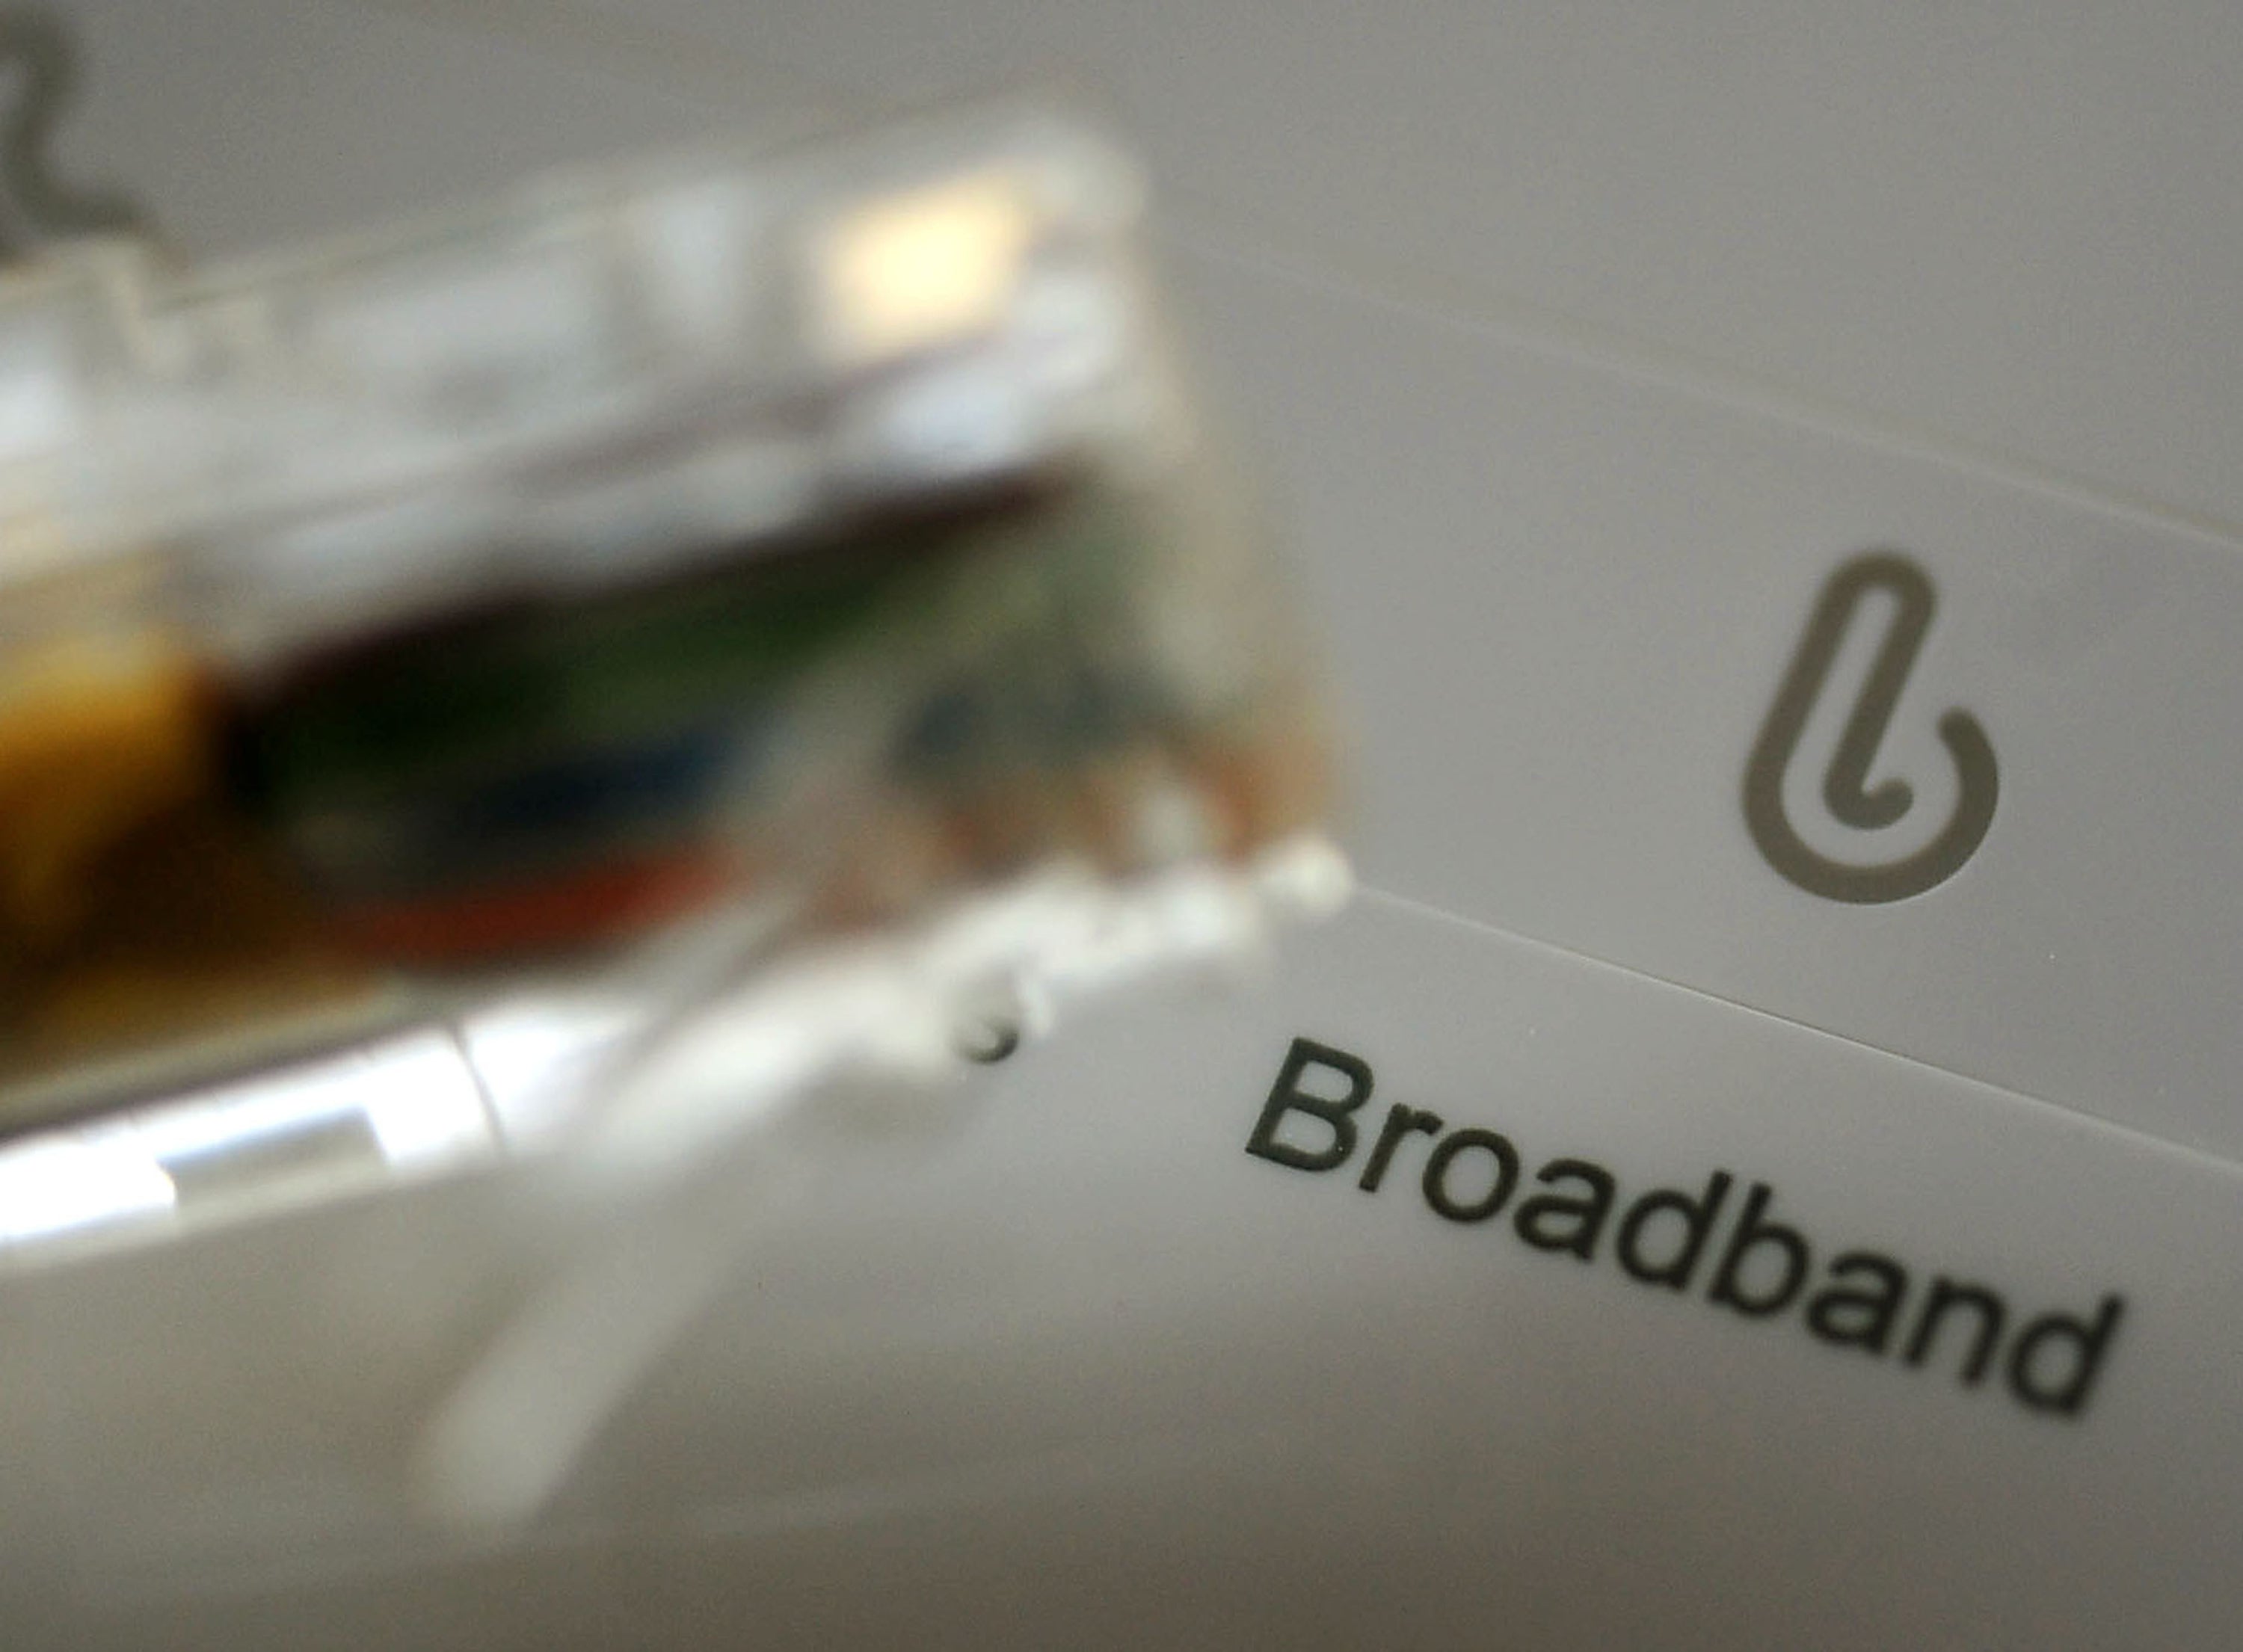 Ofcom said low-income families are missing out on cheaper broadband deals (PA)